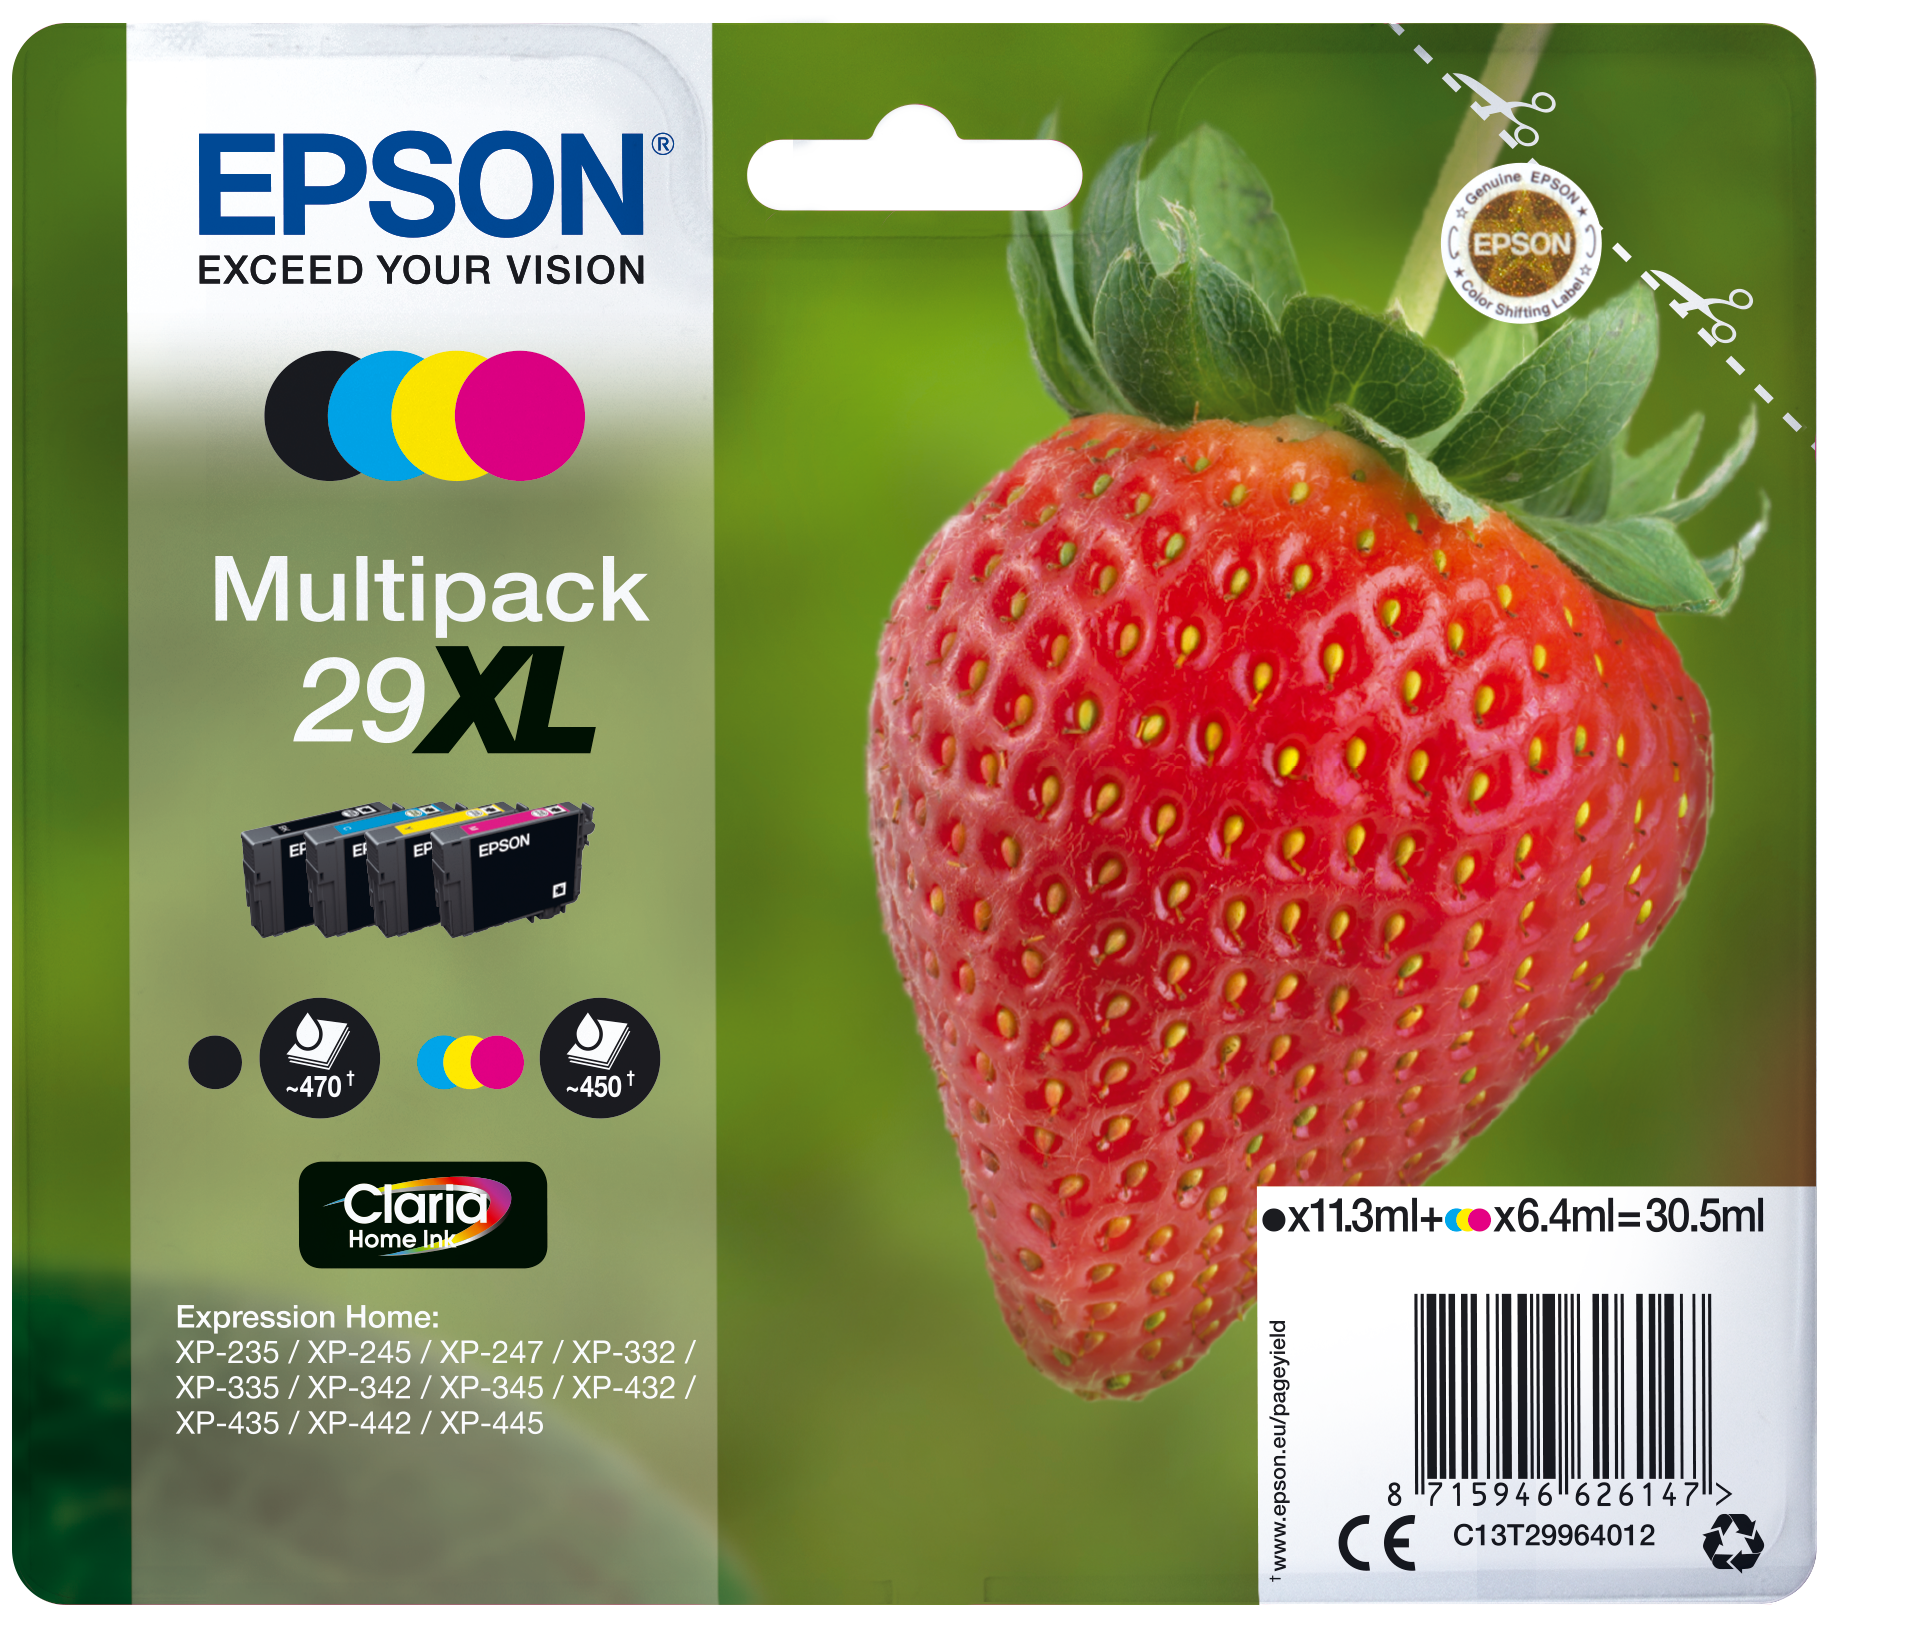 Epson Strawberry Multipack 4-colours 29XL Claria Home Ink single pack / cyaan, geel, magenta, zwart